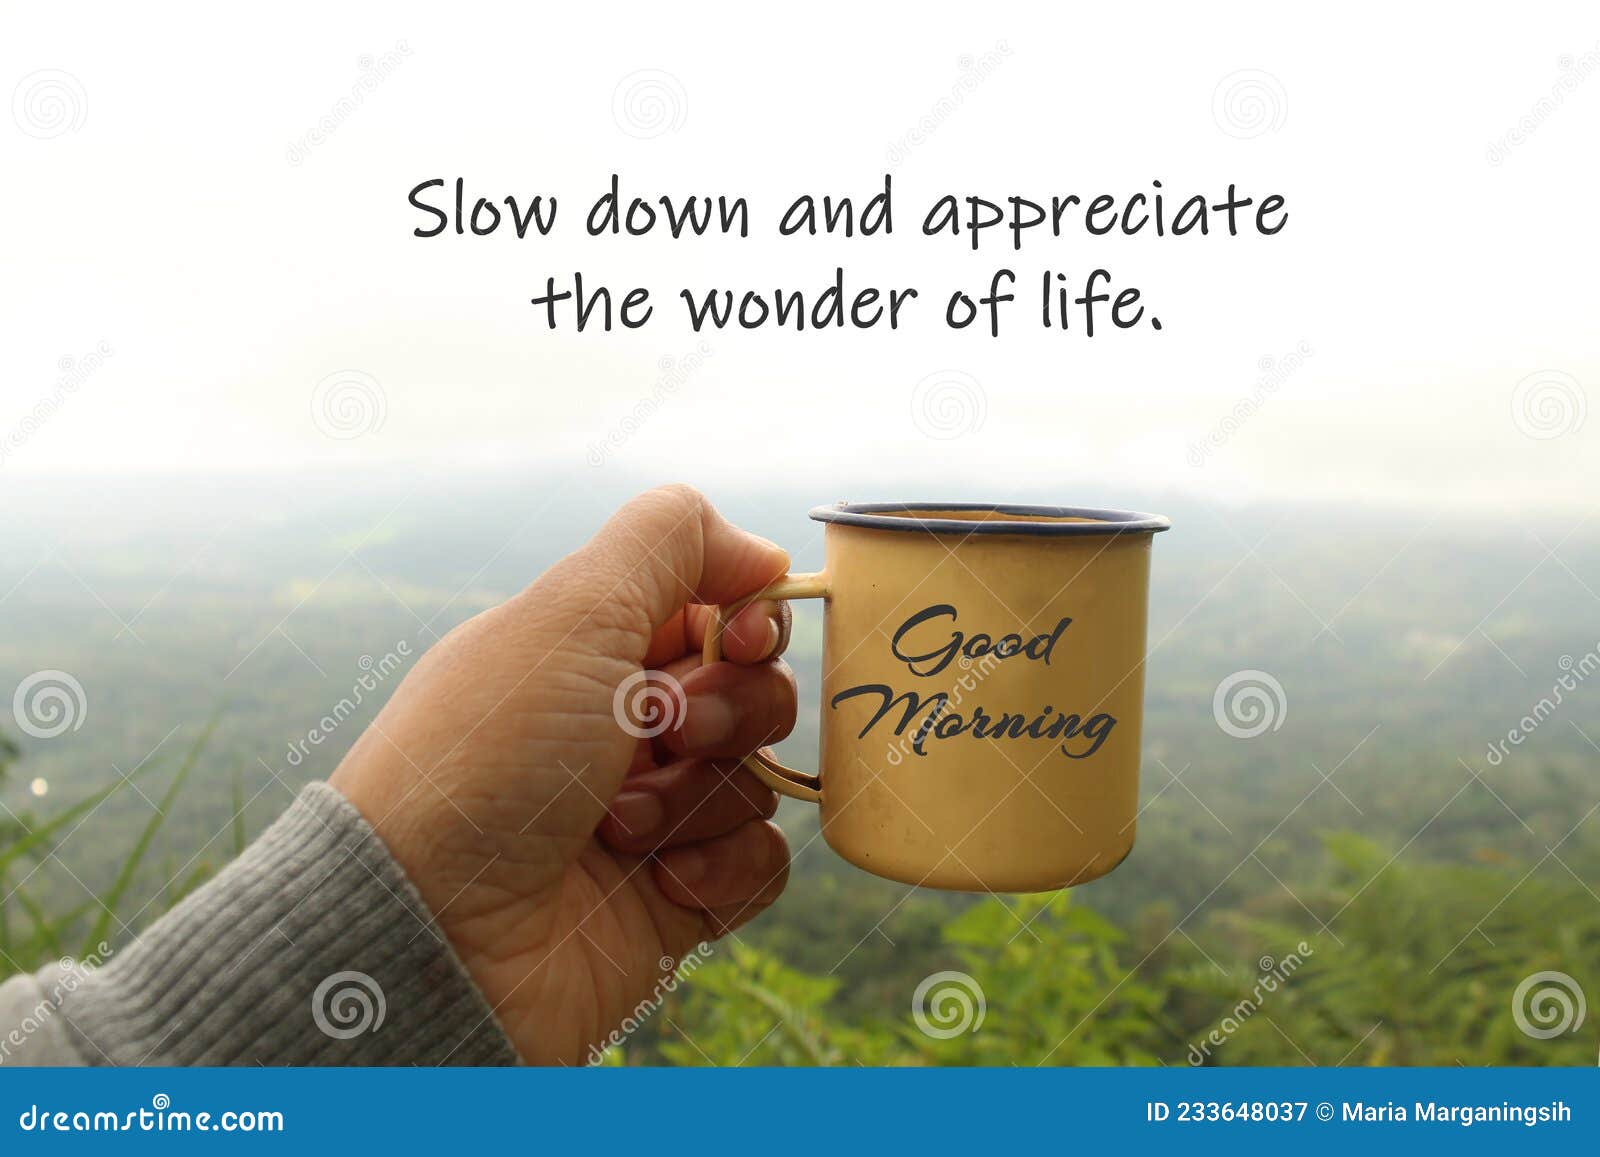 Good Morning Greeting on Cup of Coffee in Hand with Grateful ...